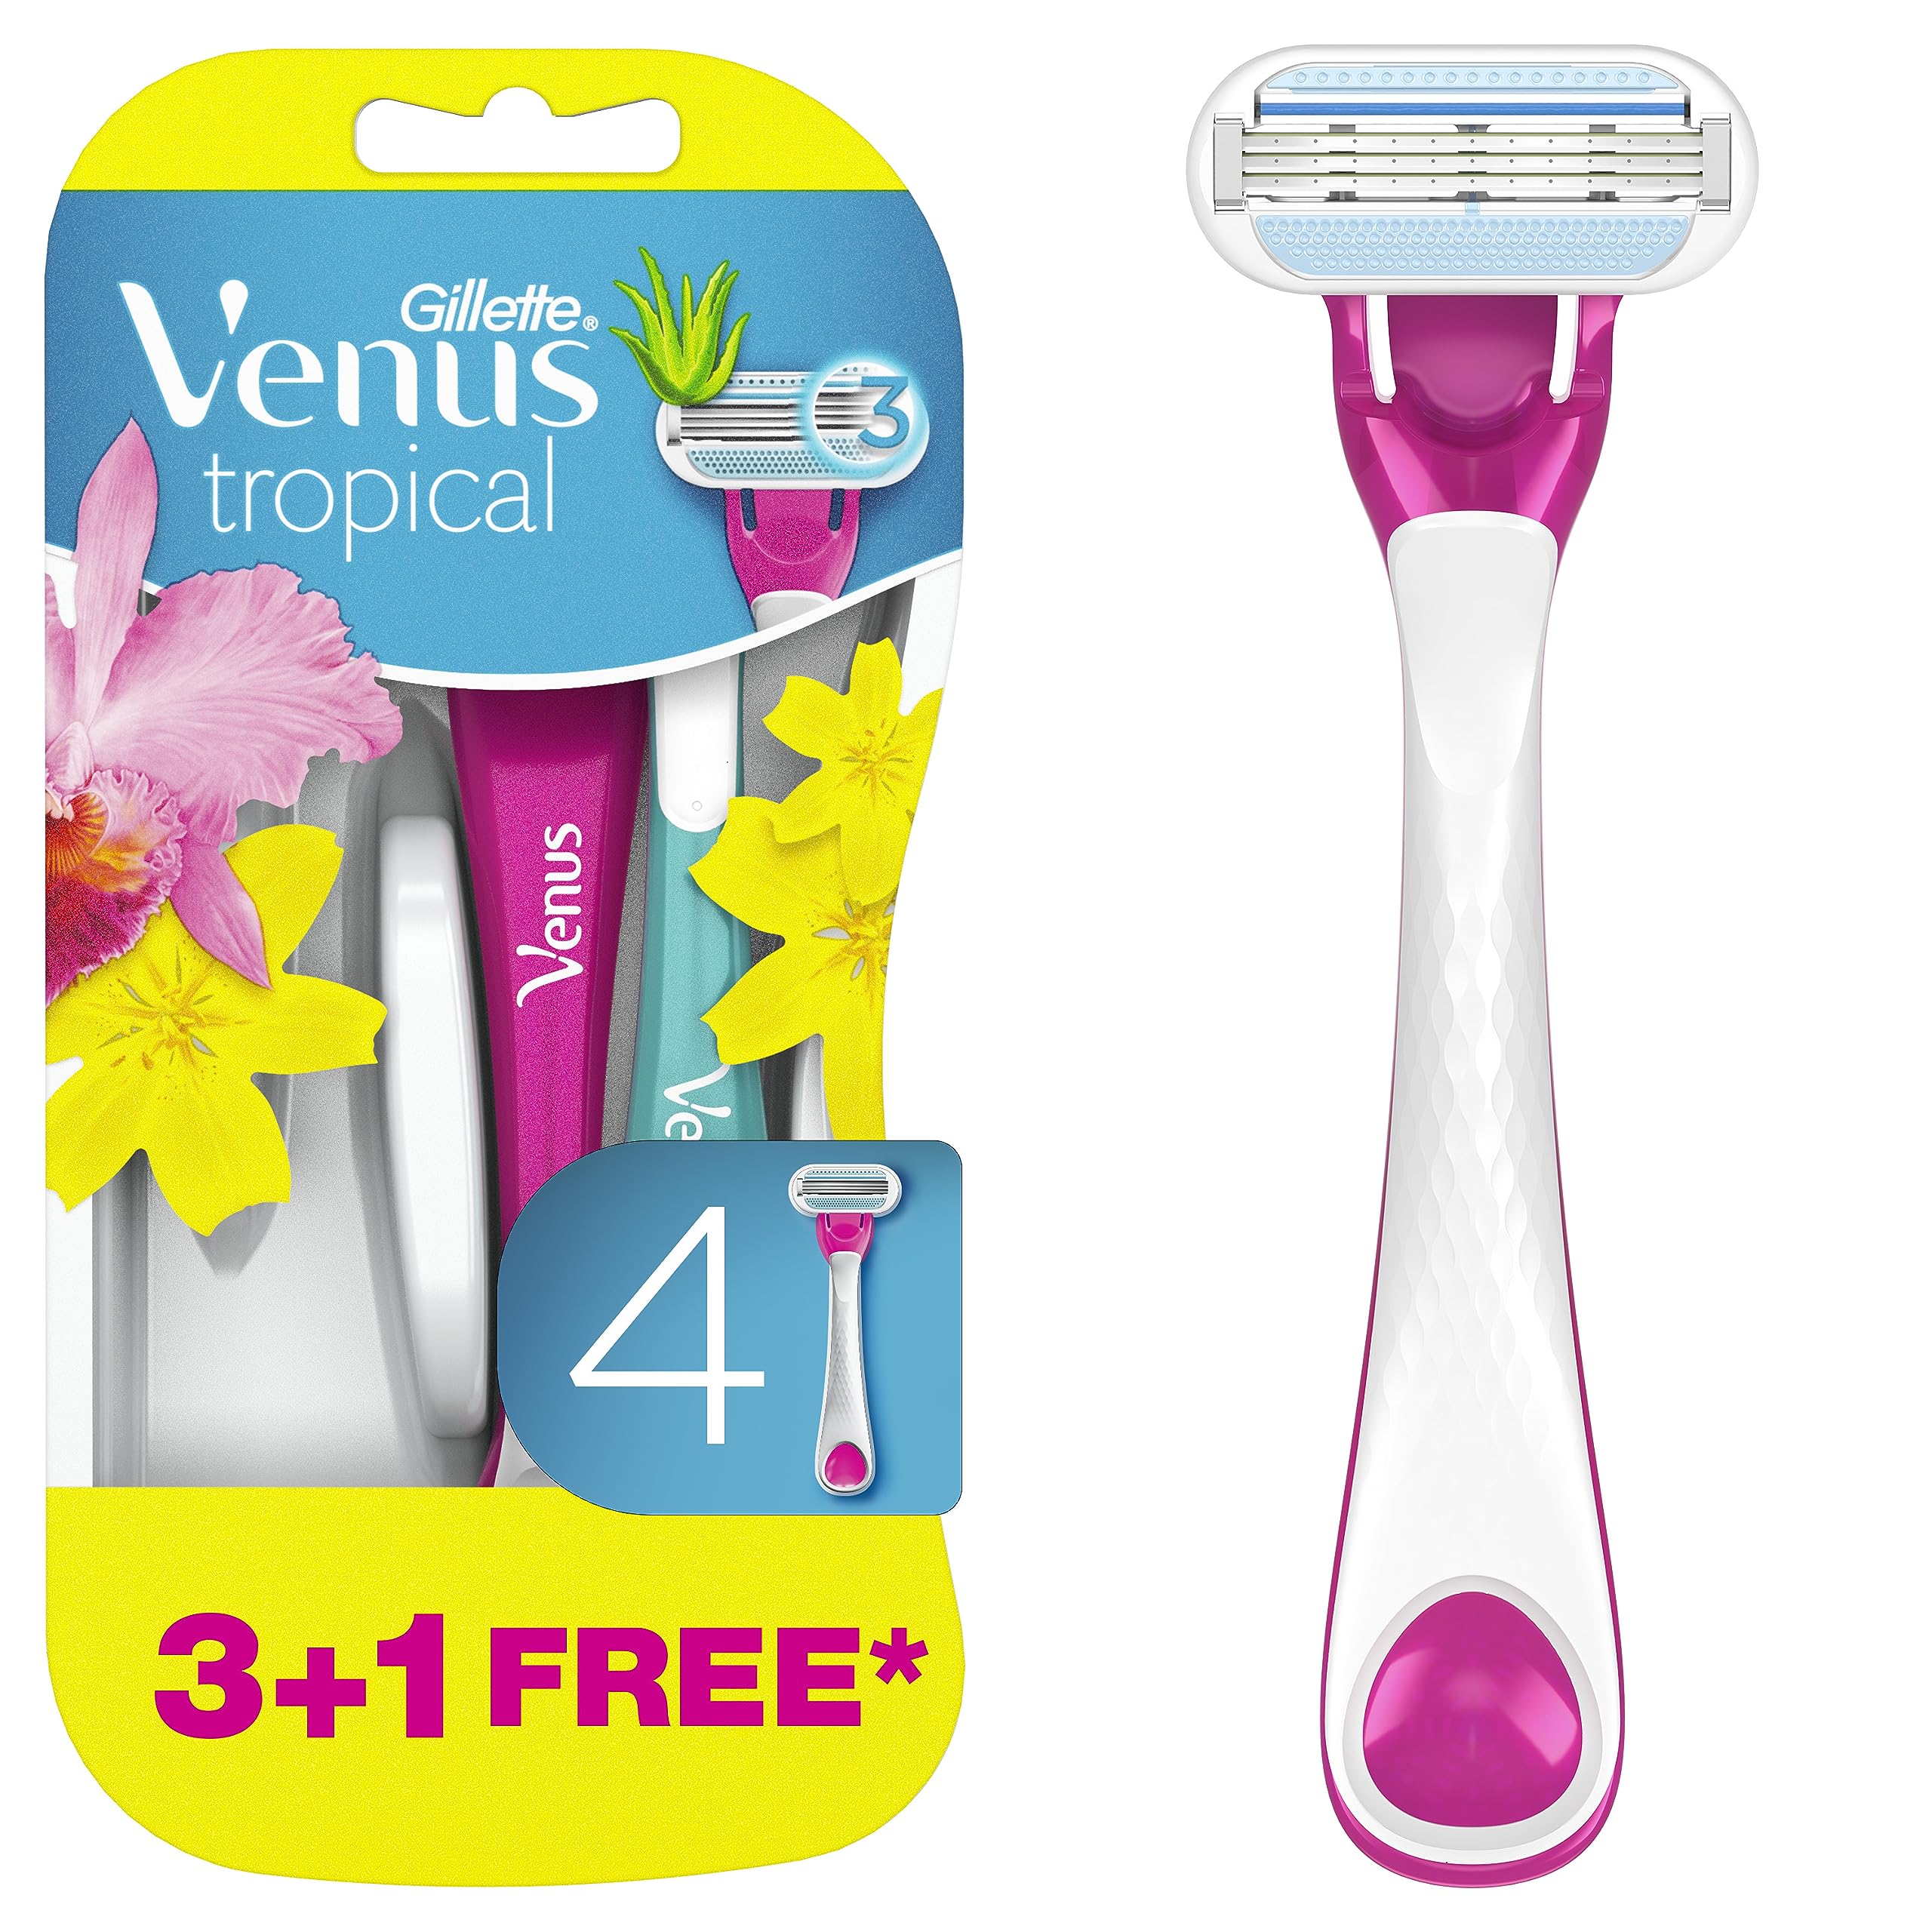 Gillette Venus Tropical Disposable Razors for Women, 3 Count, Designed for a Smooth Shave, Tropical Fragrance Scented Handles